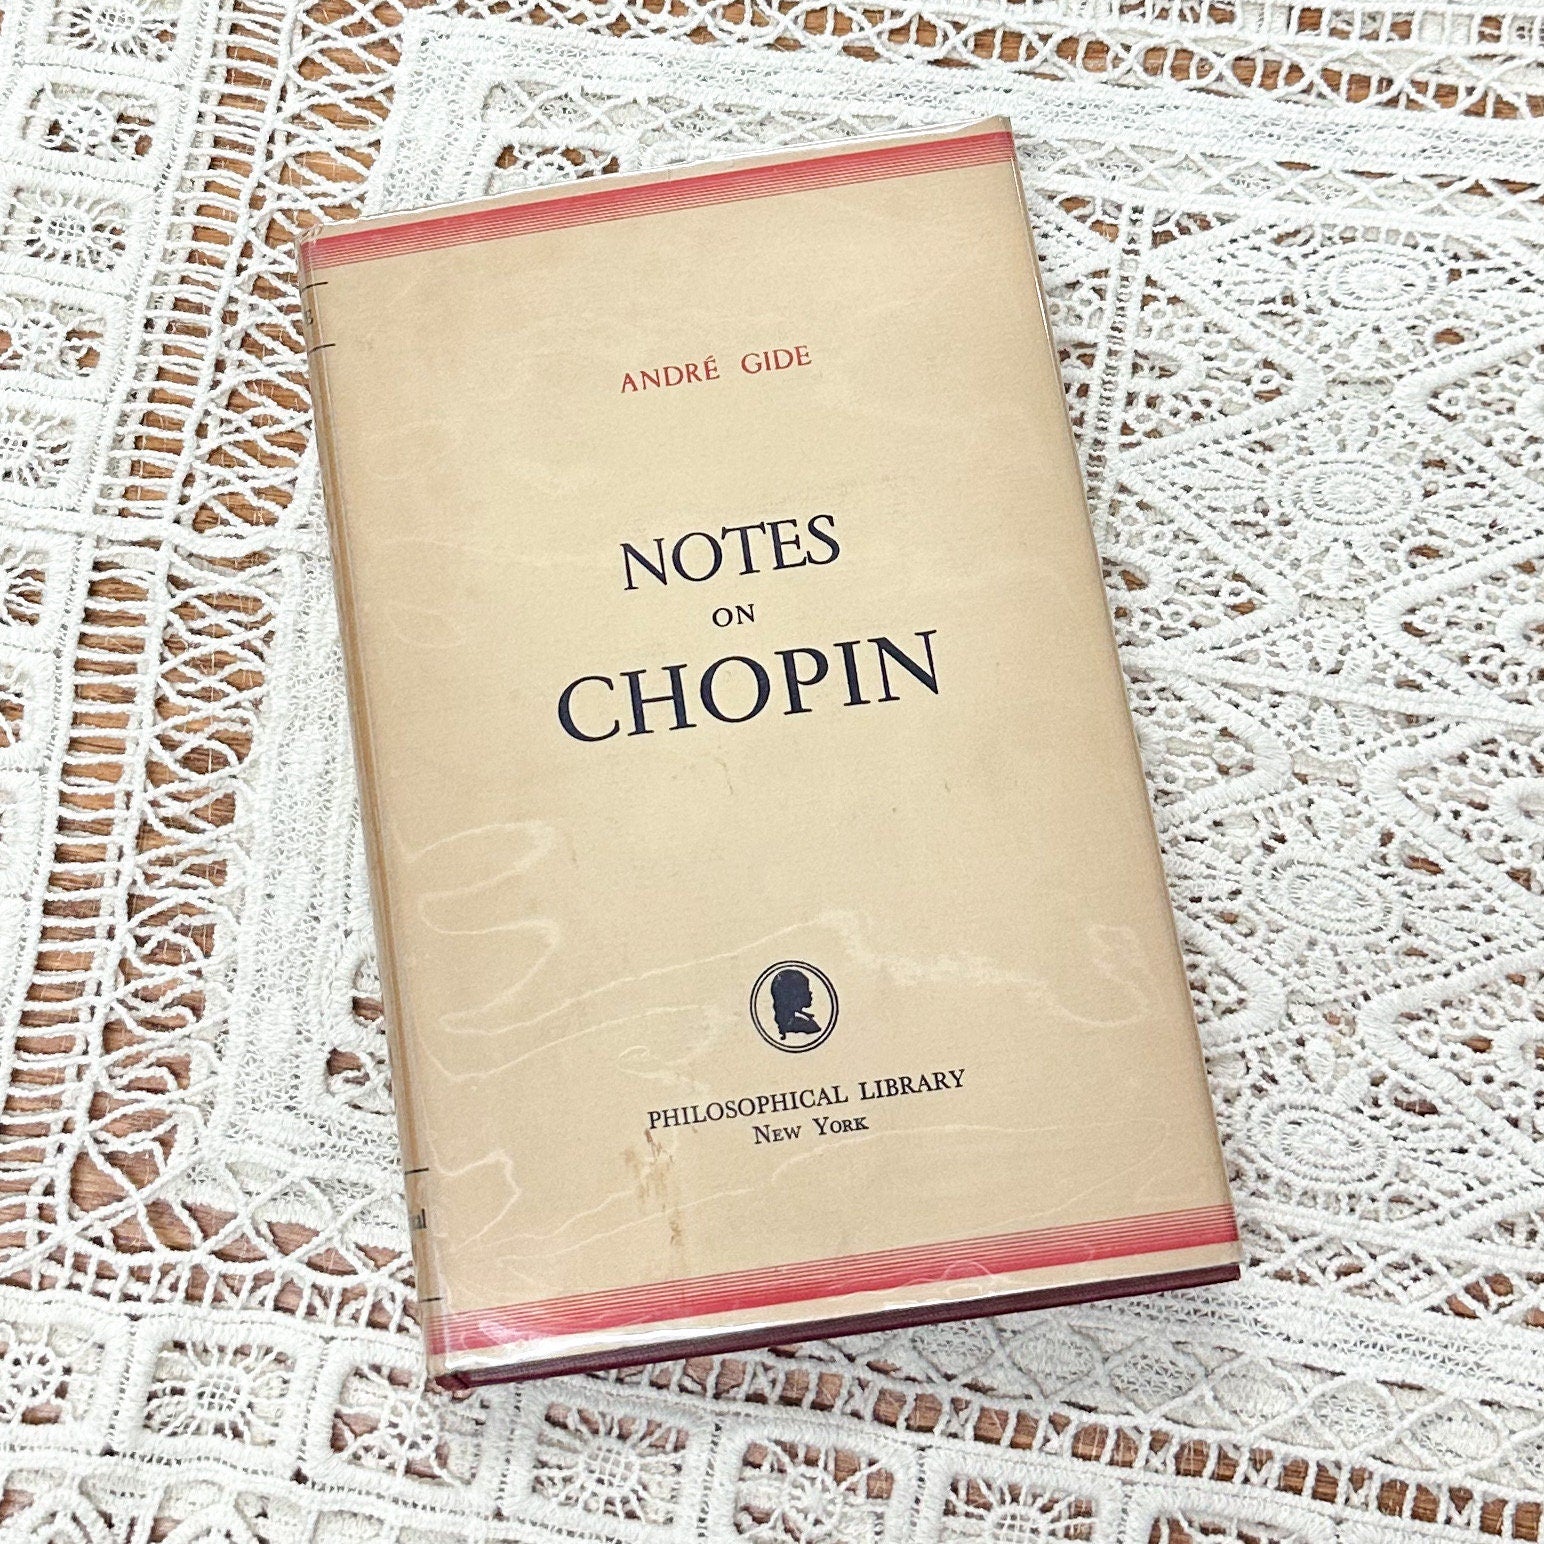 Notes on Chopin by Andre Gide